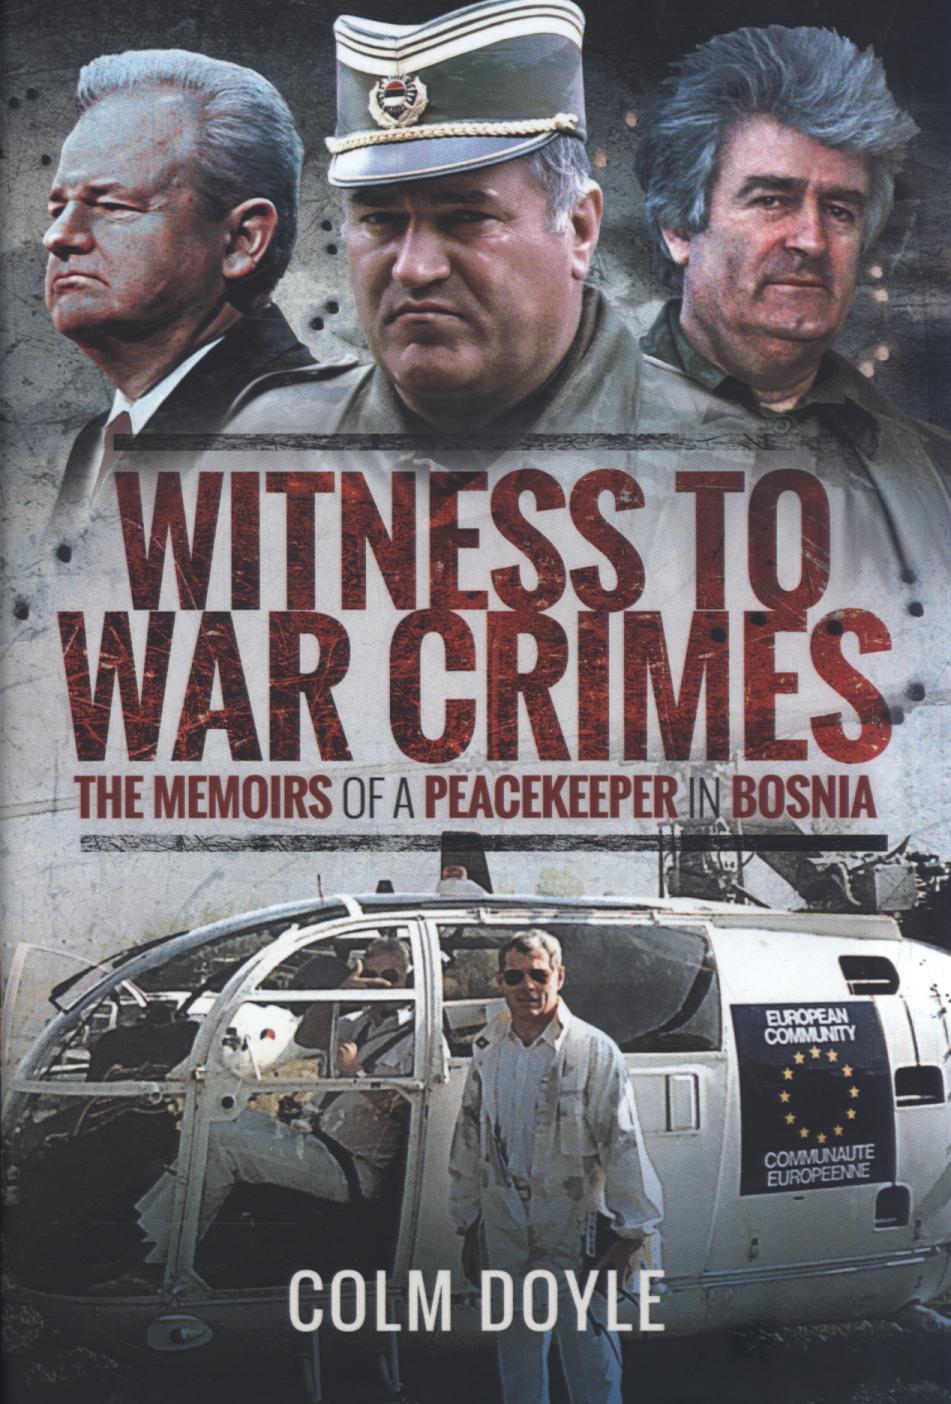 Witness to War Crimes